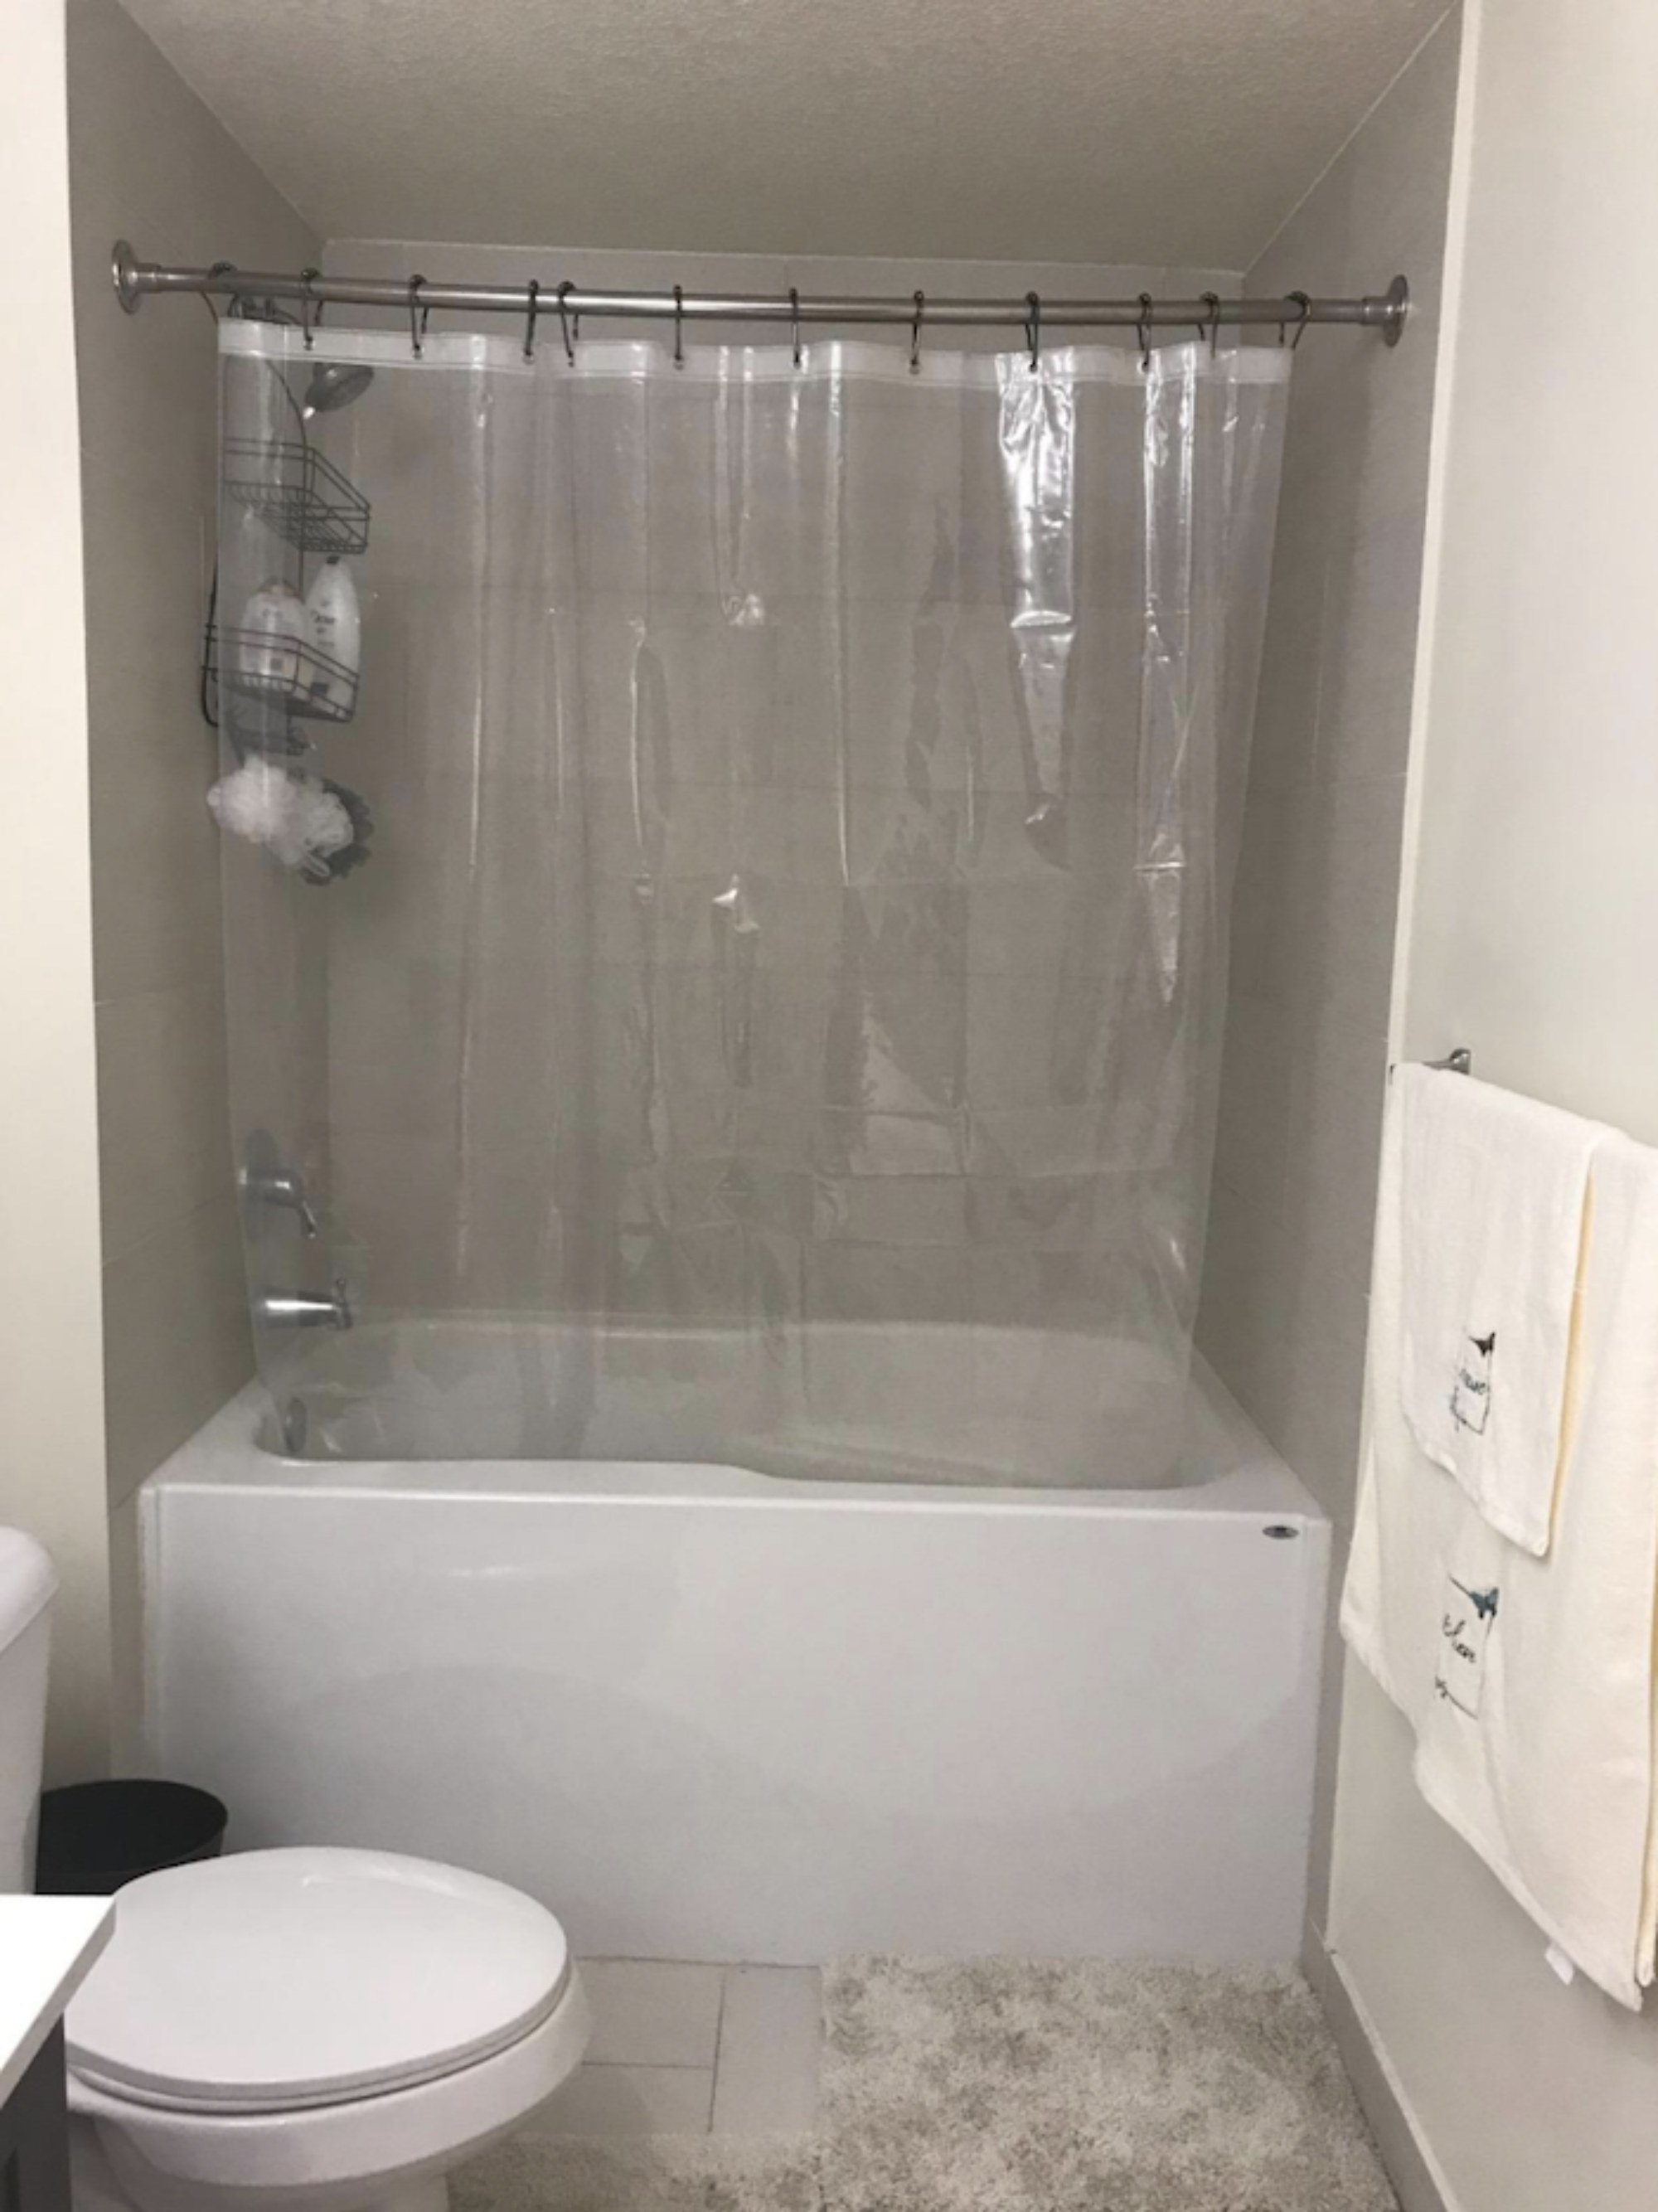 Transparent shower curtain hanging in the bathroom